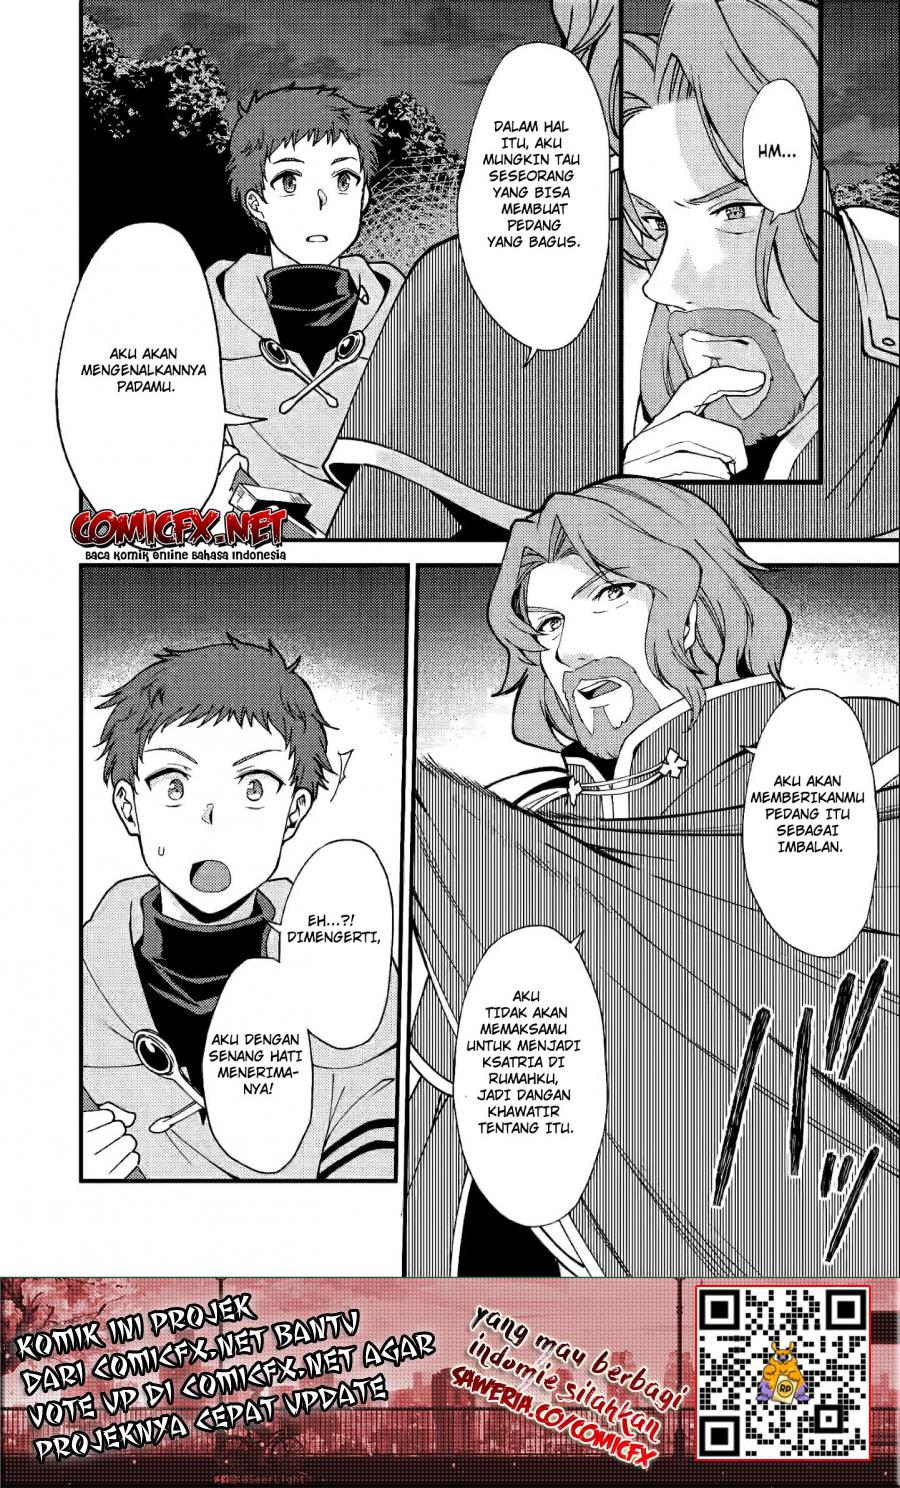 A Sword Master Childhood Friend Power Harassed Me Harshly, So I Broke off Our Relationship and Make a Fresh Start at the Frontier as a Magic Swordsman Chapter 07.2